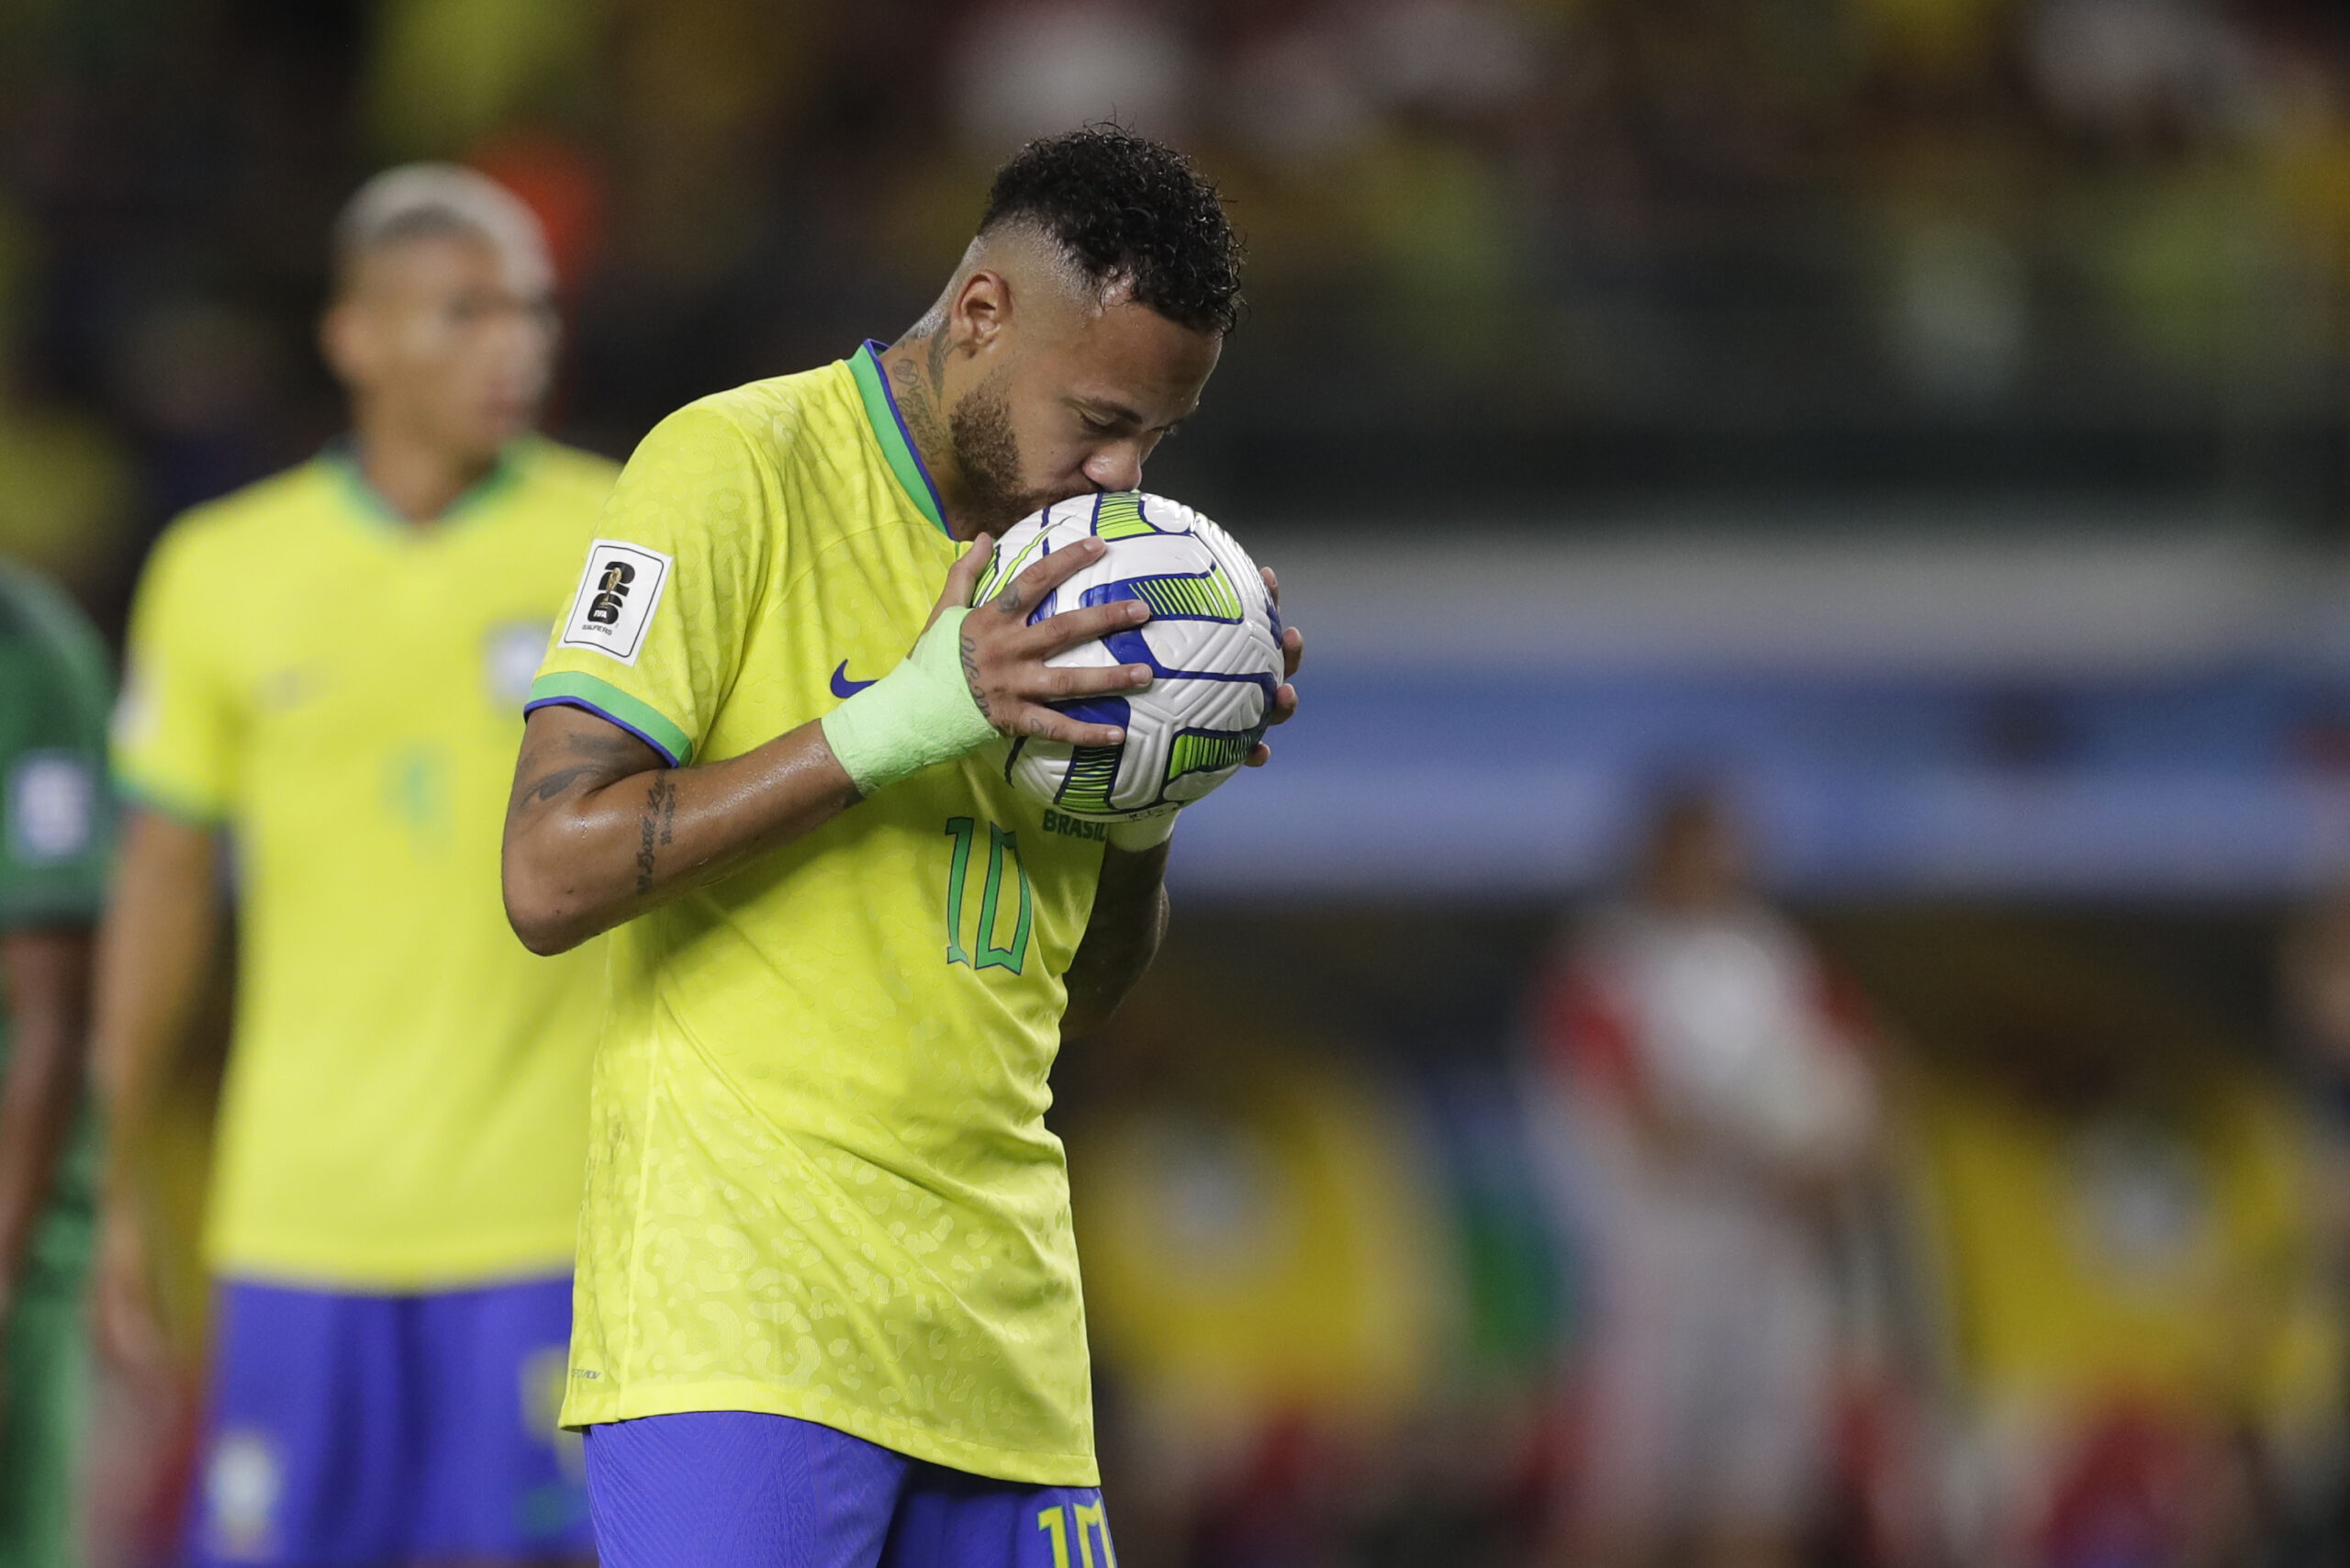 5 players who have the most wins for the Brazil national team